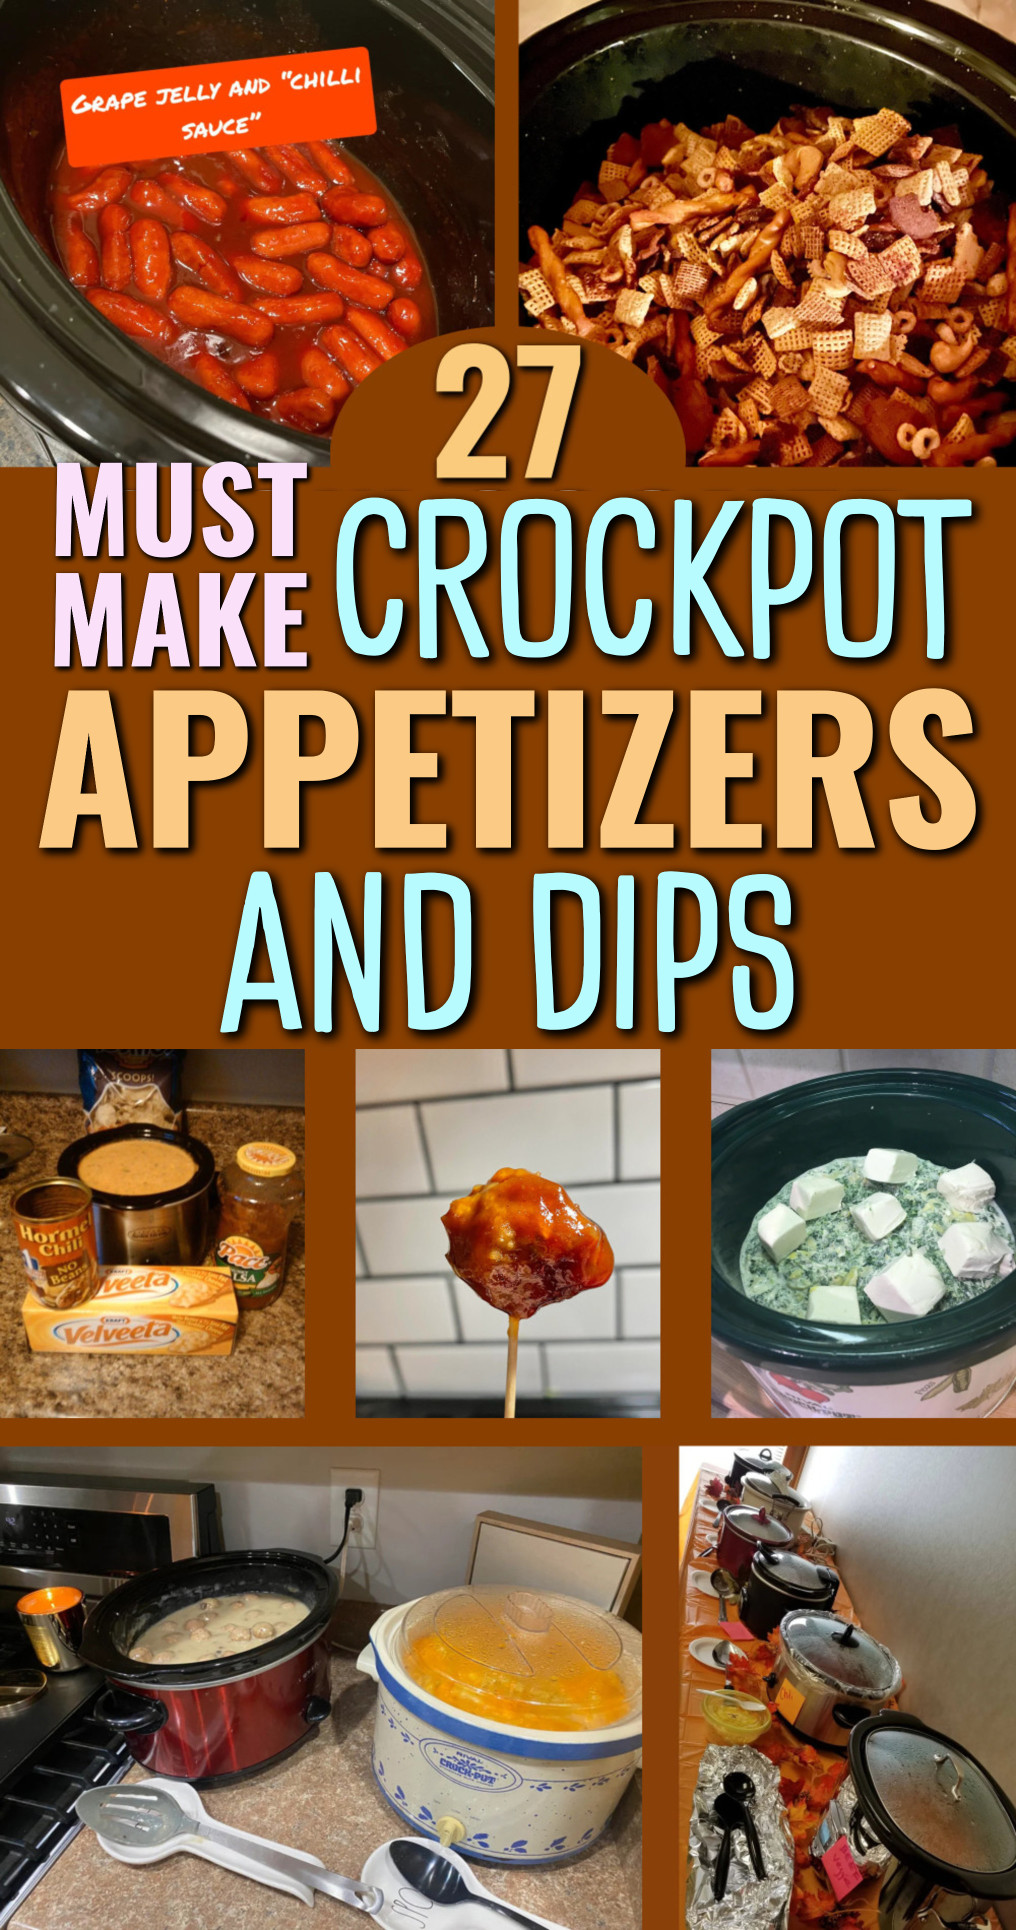 27 Must Make Crockpot Appetizers and Dips